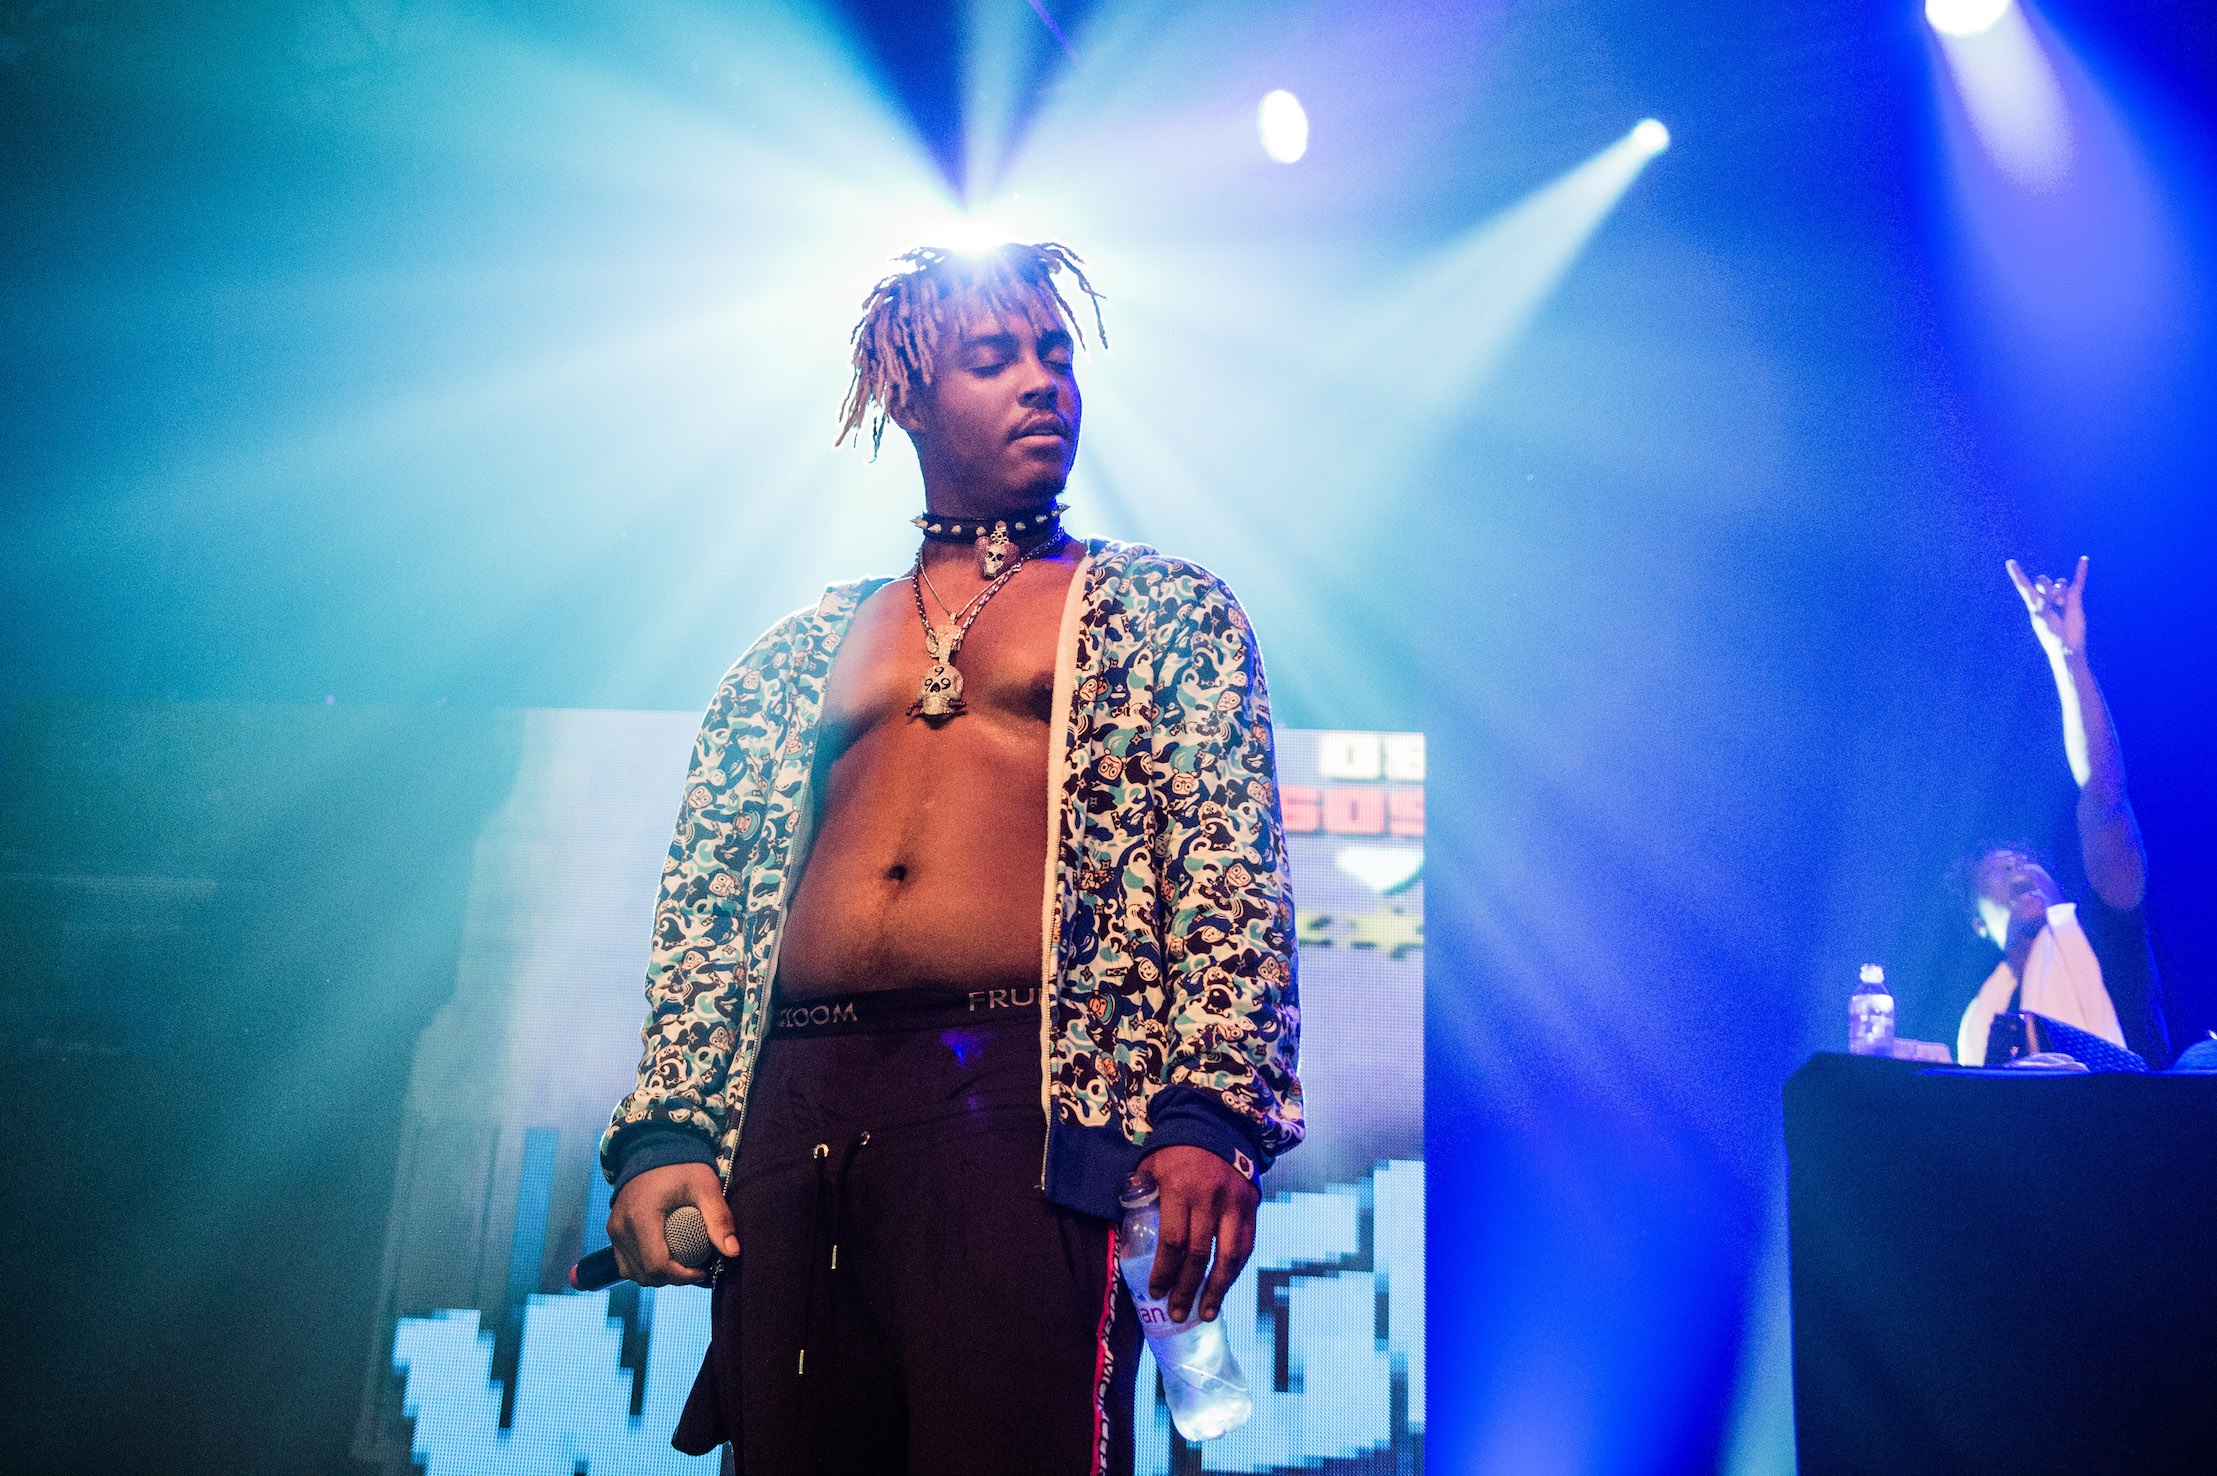 Juice WRLD performing on stage with his shirt open and eyes closed